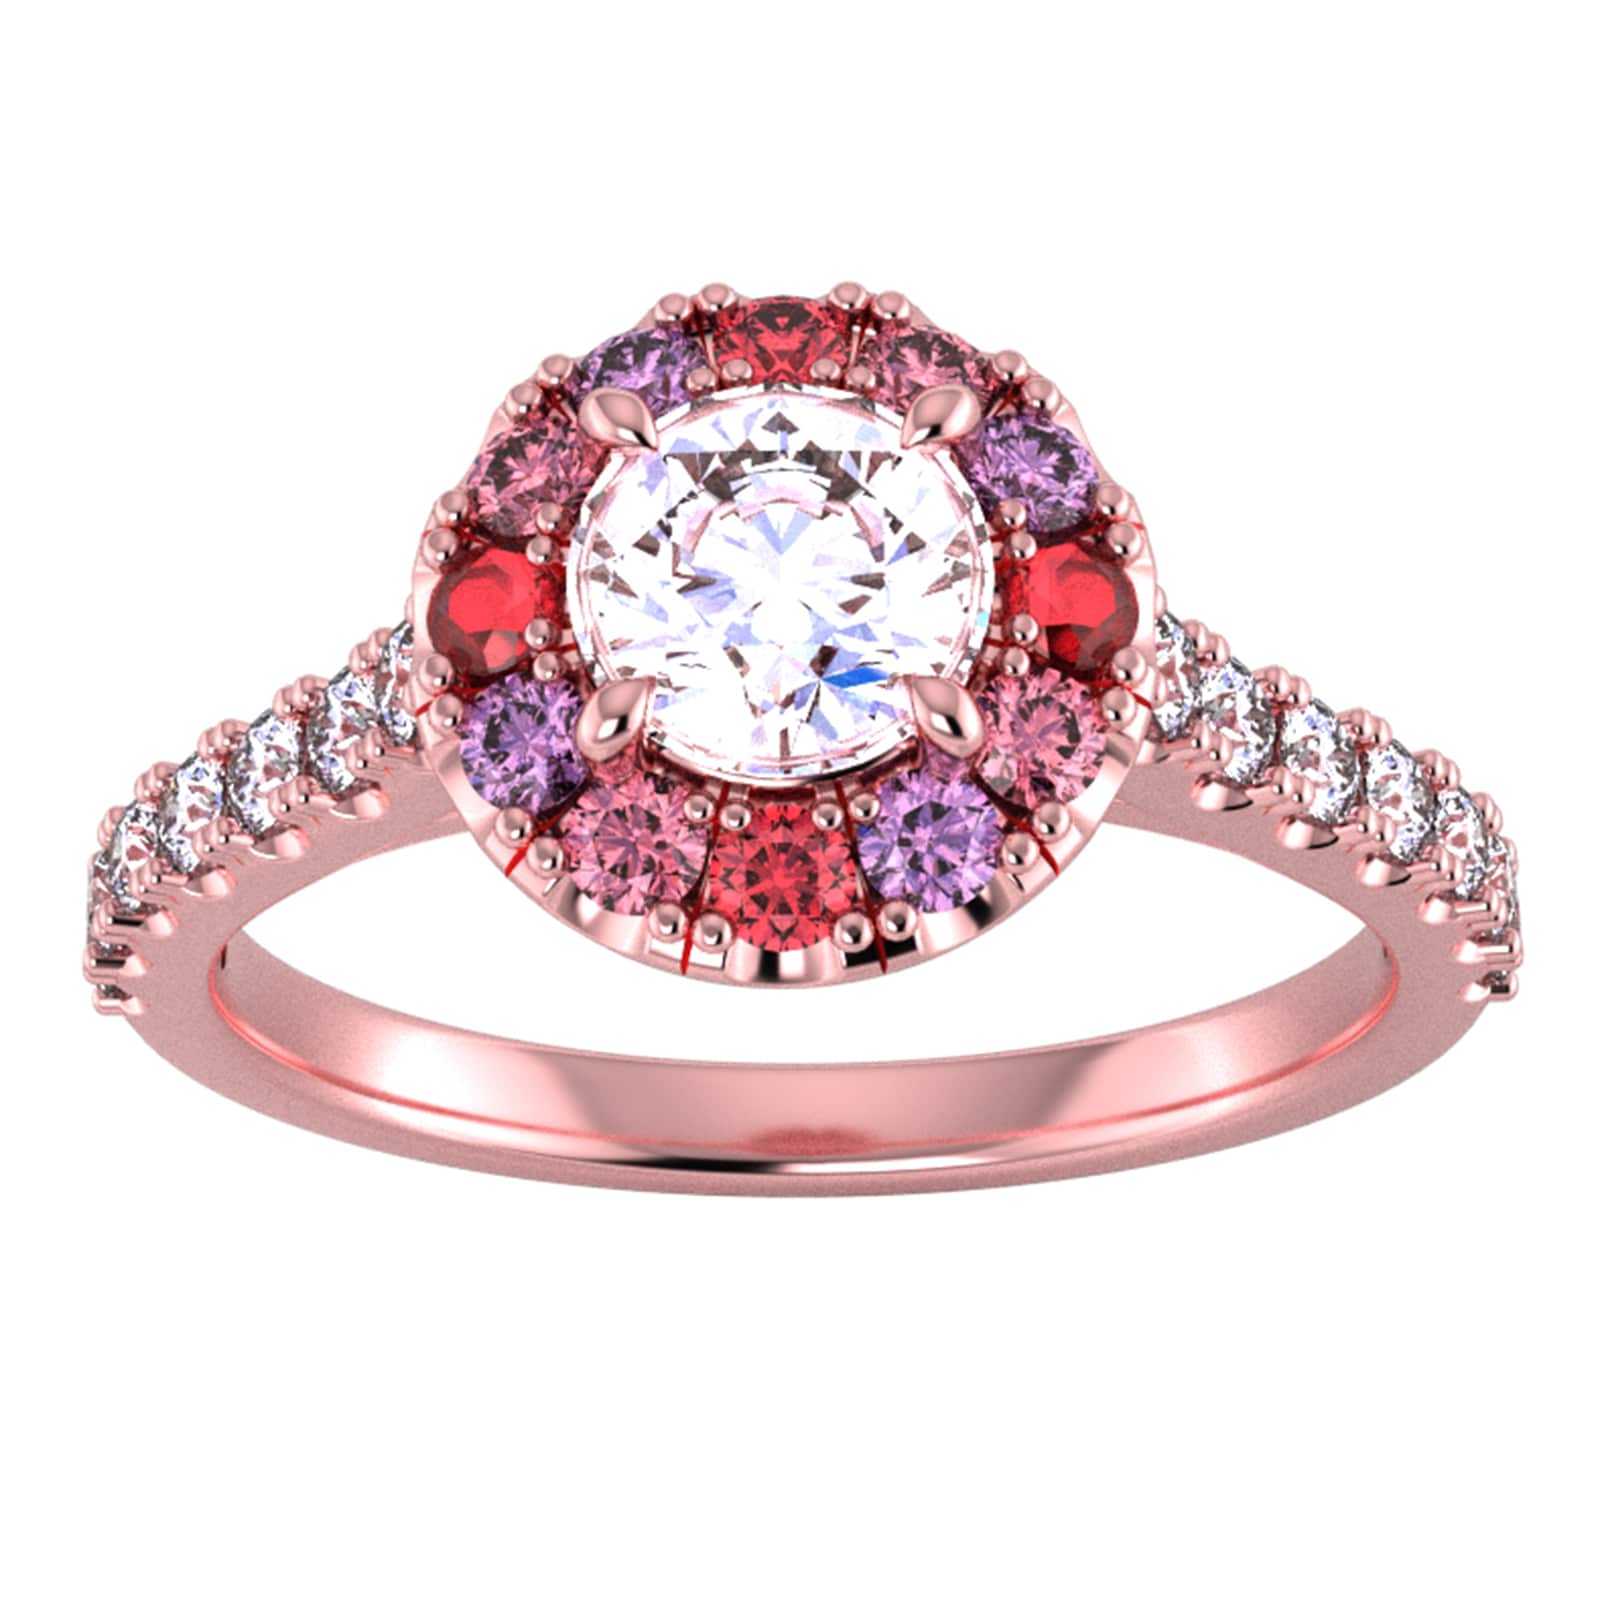 18ct Rose Gold Diamond & Pink, Red, Purple Sapphire Halo Ring - Ring Size M.5